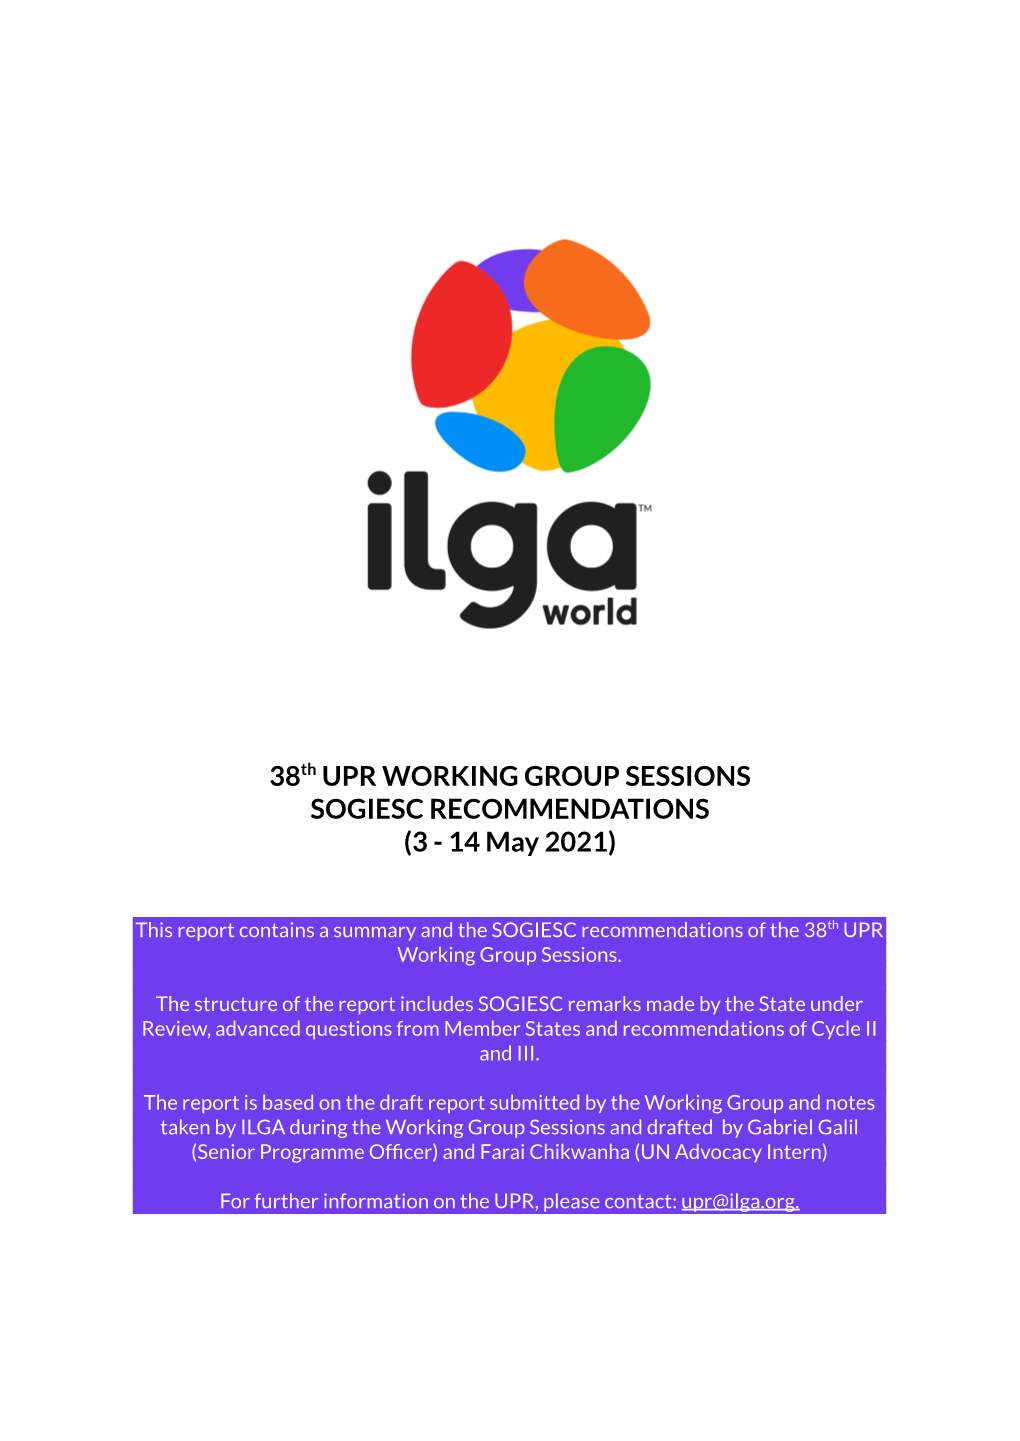 38Th UPR WORKING GROUP SESSIONS SOGIESC RECOMMENDATIONS (3 - 14 May 2021)